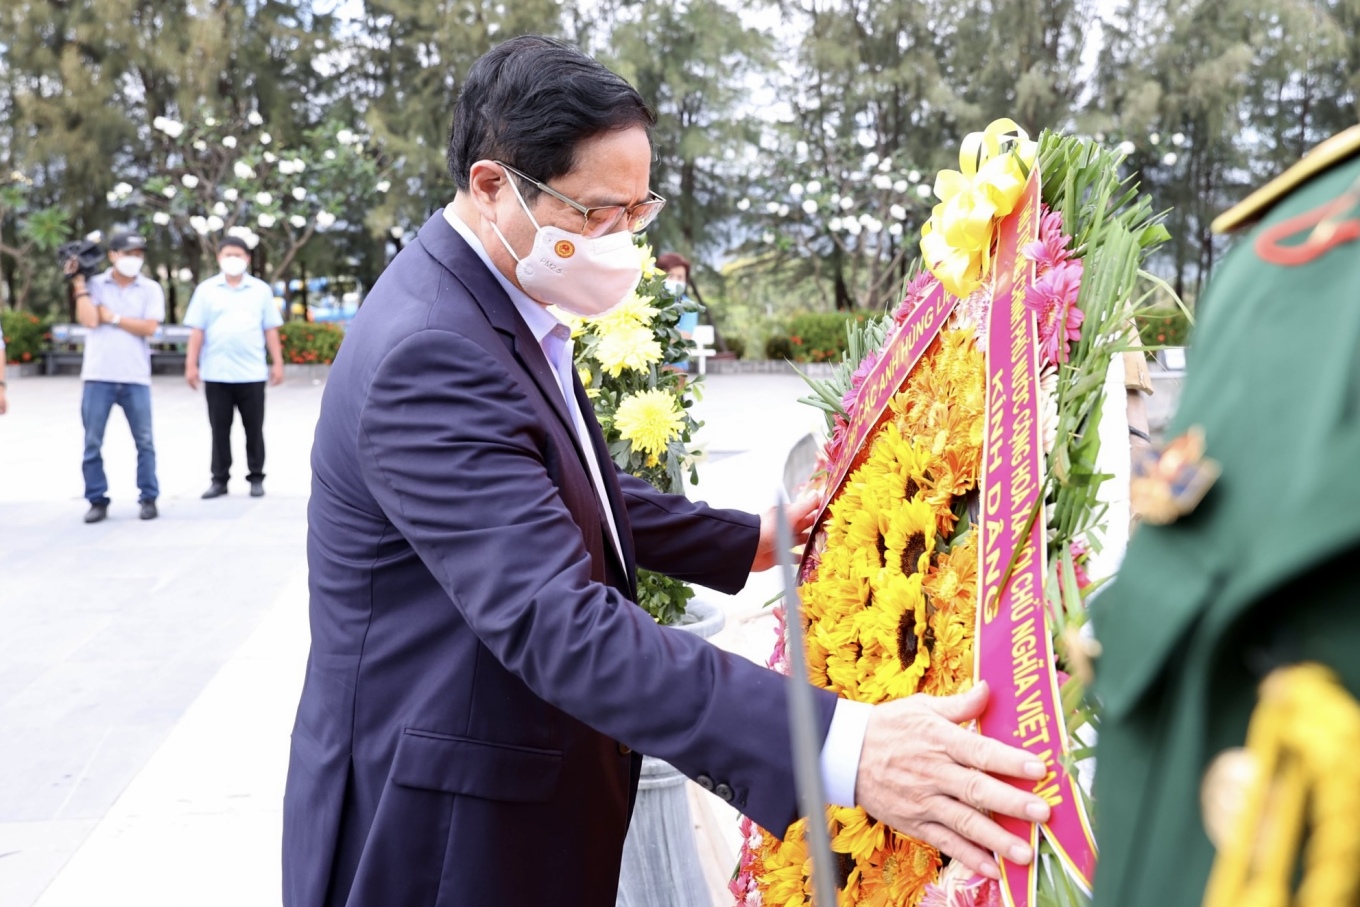 Prime Minister Pham Minh Chinh lays a wreath at Gac Ma memorial site in Khanh Hoa Province, March 12, 2021. Photo by Vietnam Government Portal